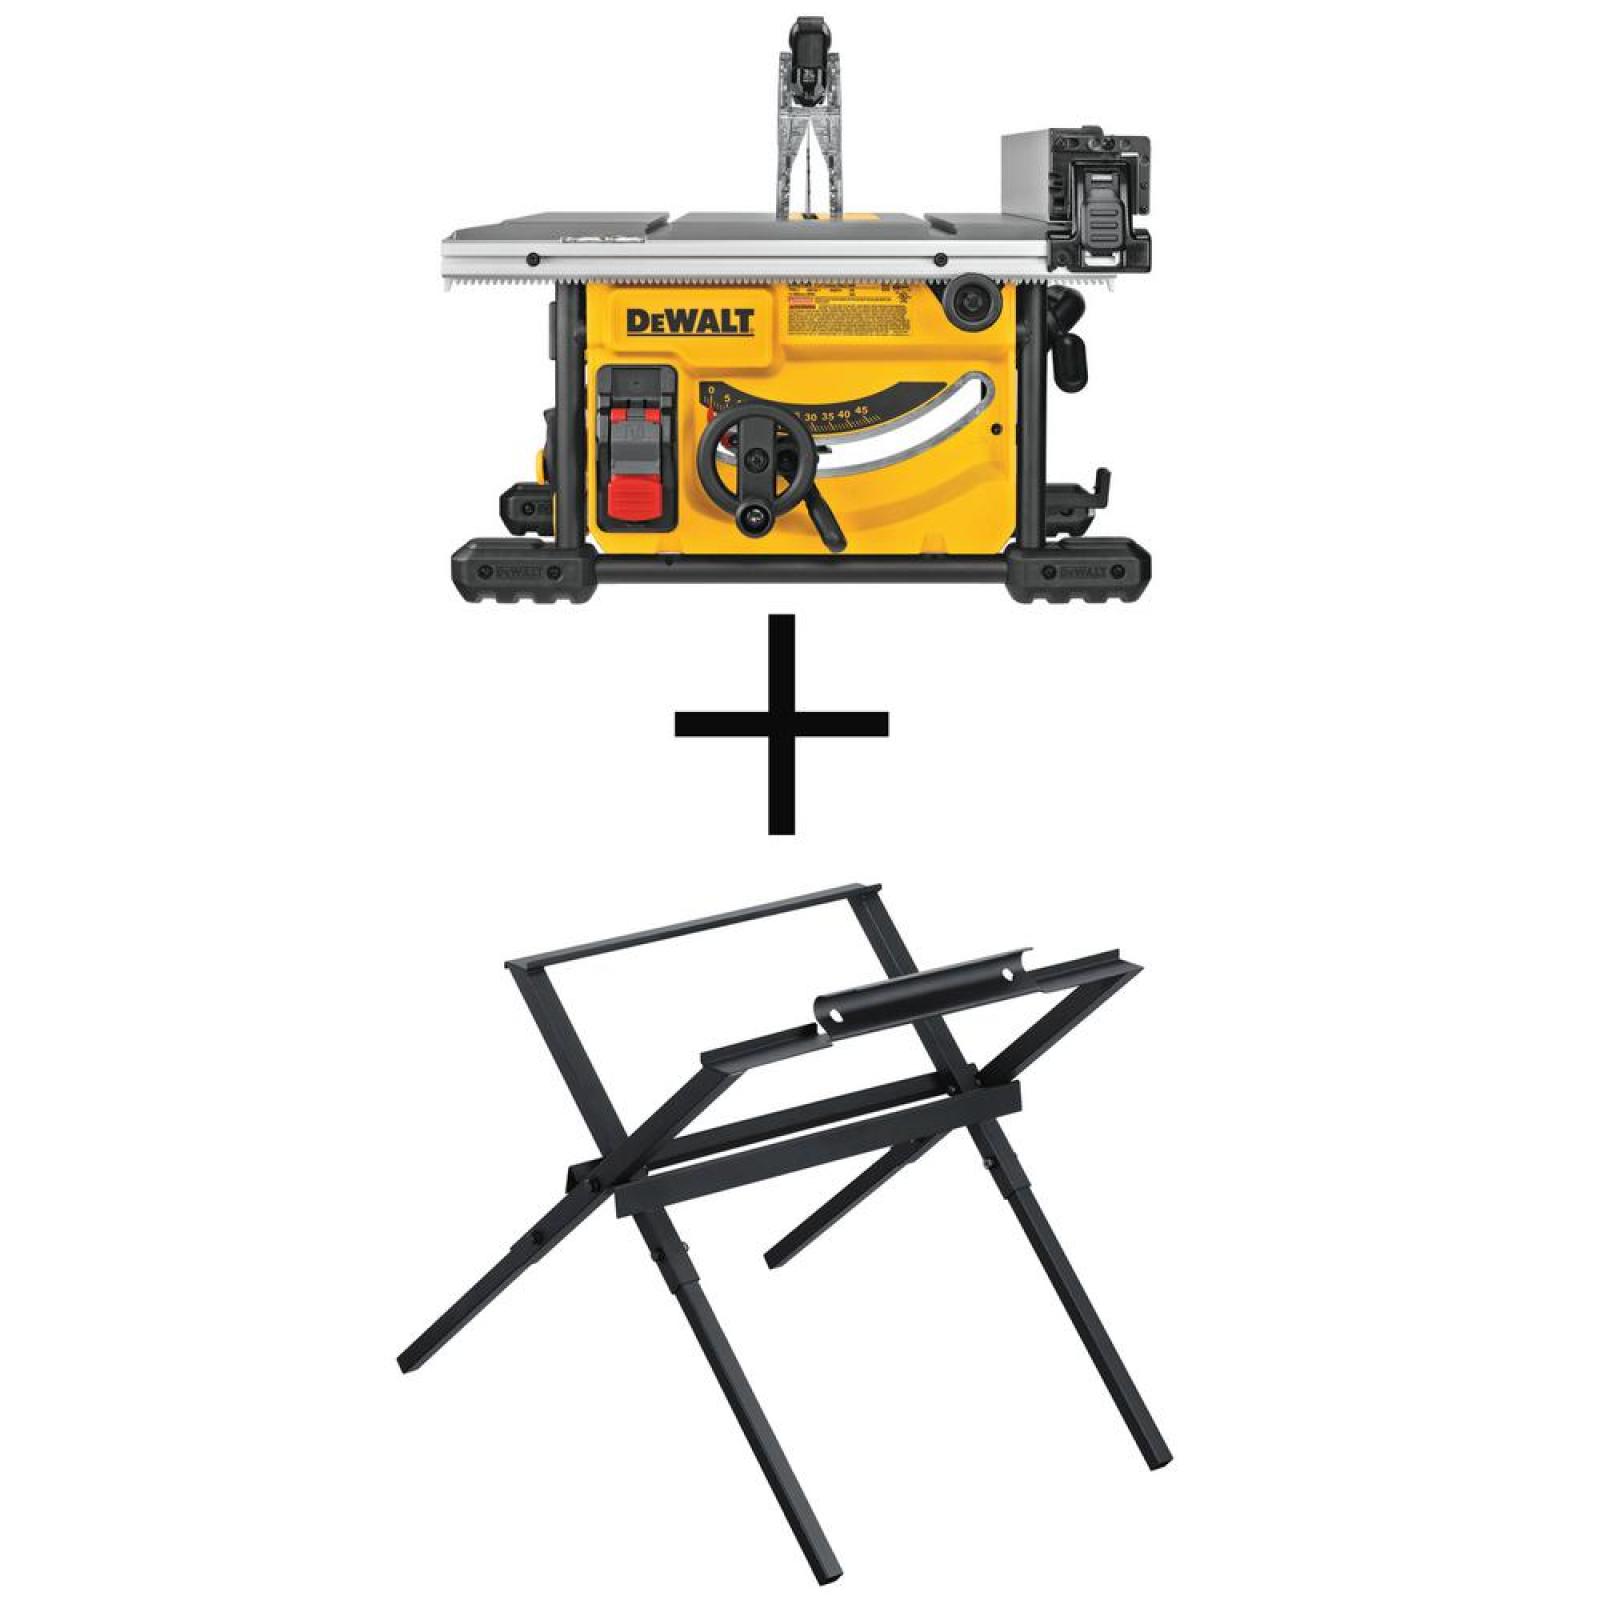 NEW - DEWALT 15 Amp Corded 8-1/4 in. Compact Jobsite Tablesaw with Compact Table Saw Stand